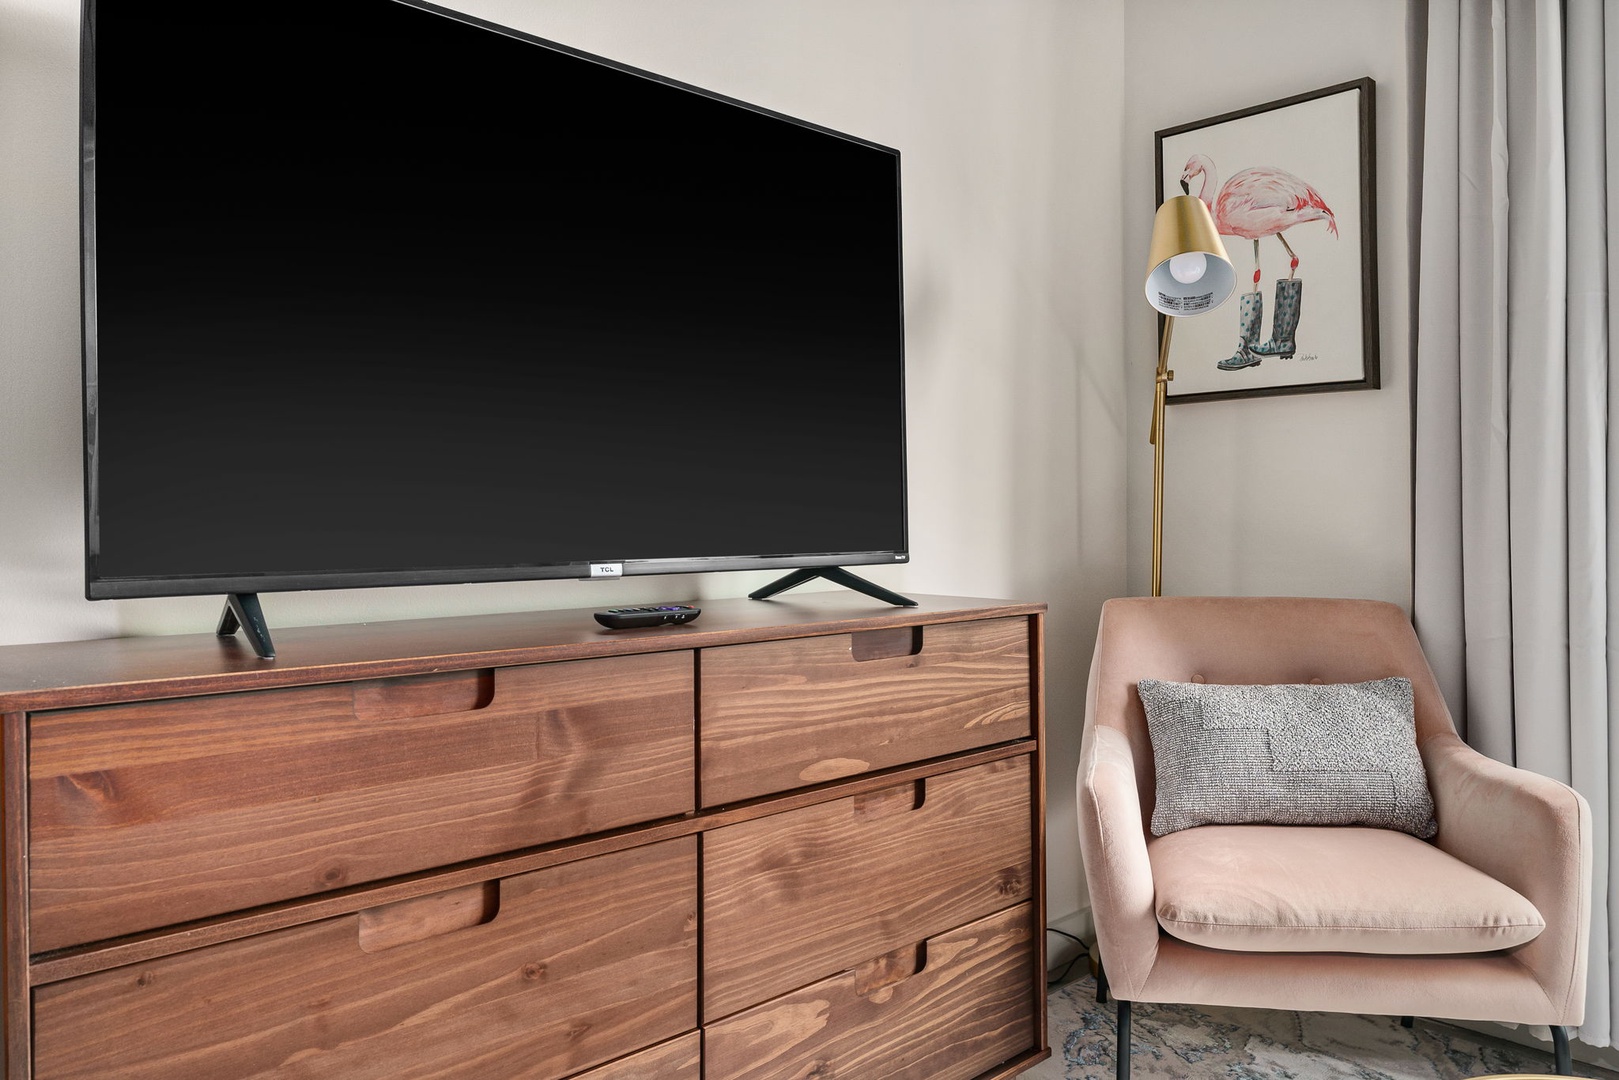 Stream your favorite shows with the smart TV and sound system.